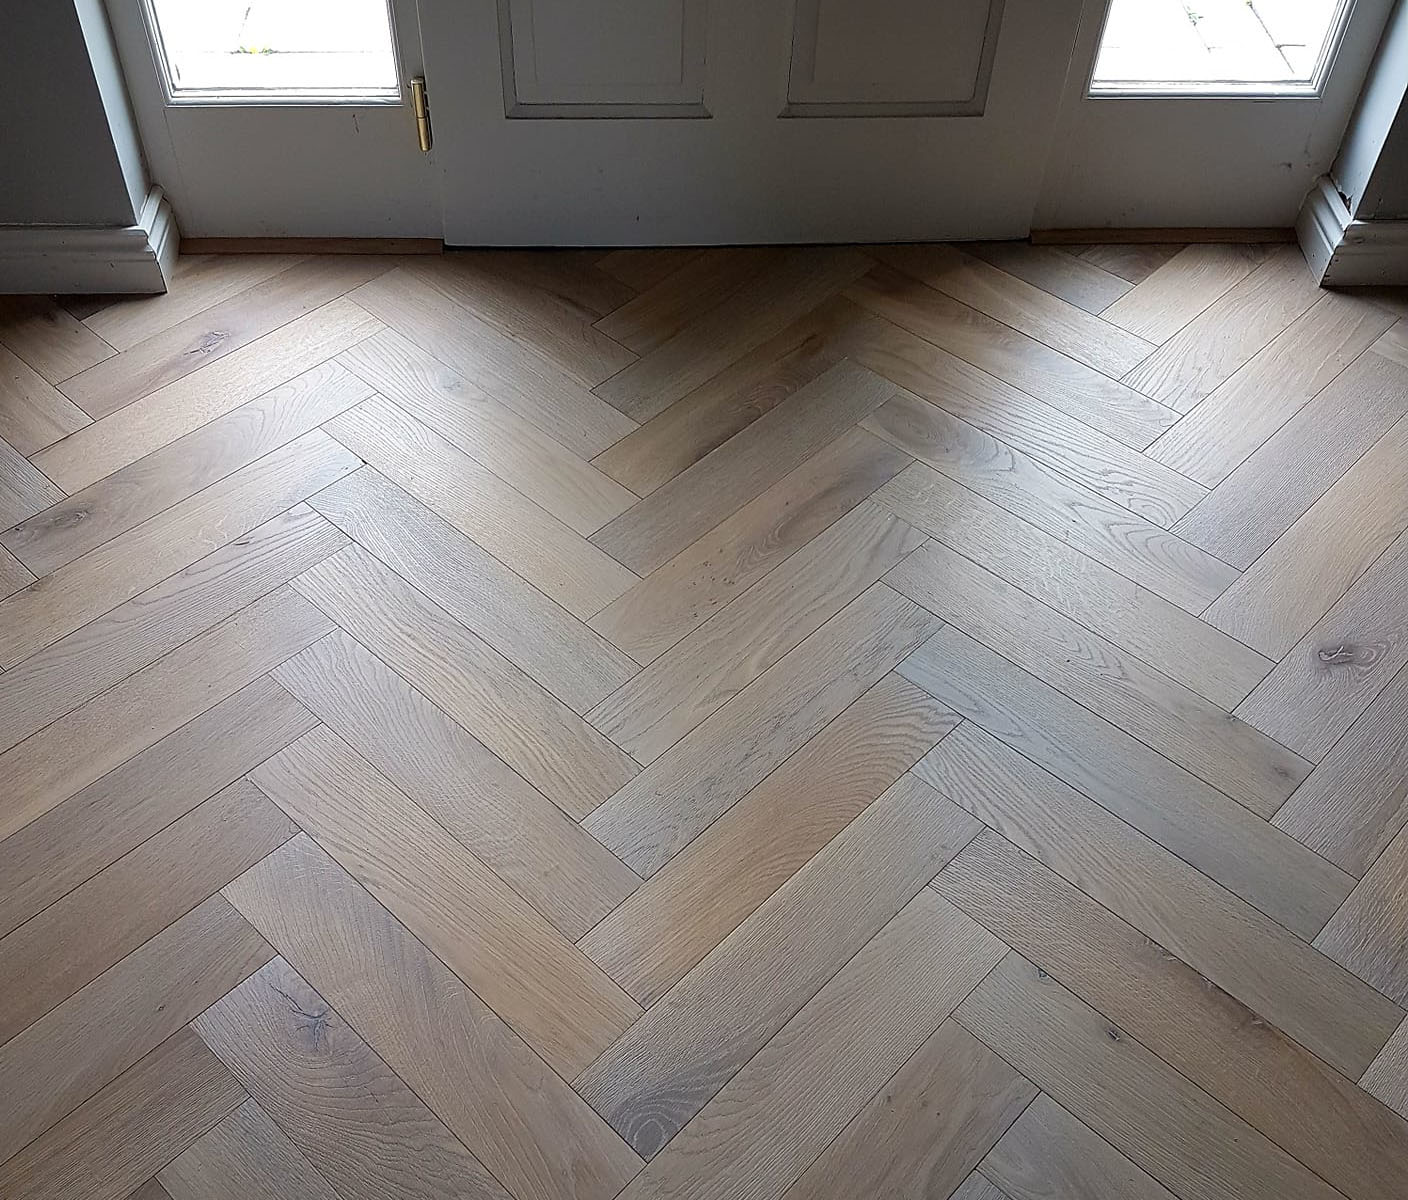 Herringbone solid wood flooring in an entrance hall of a house